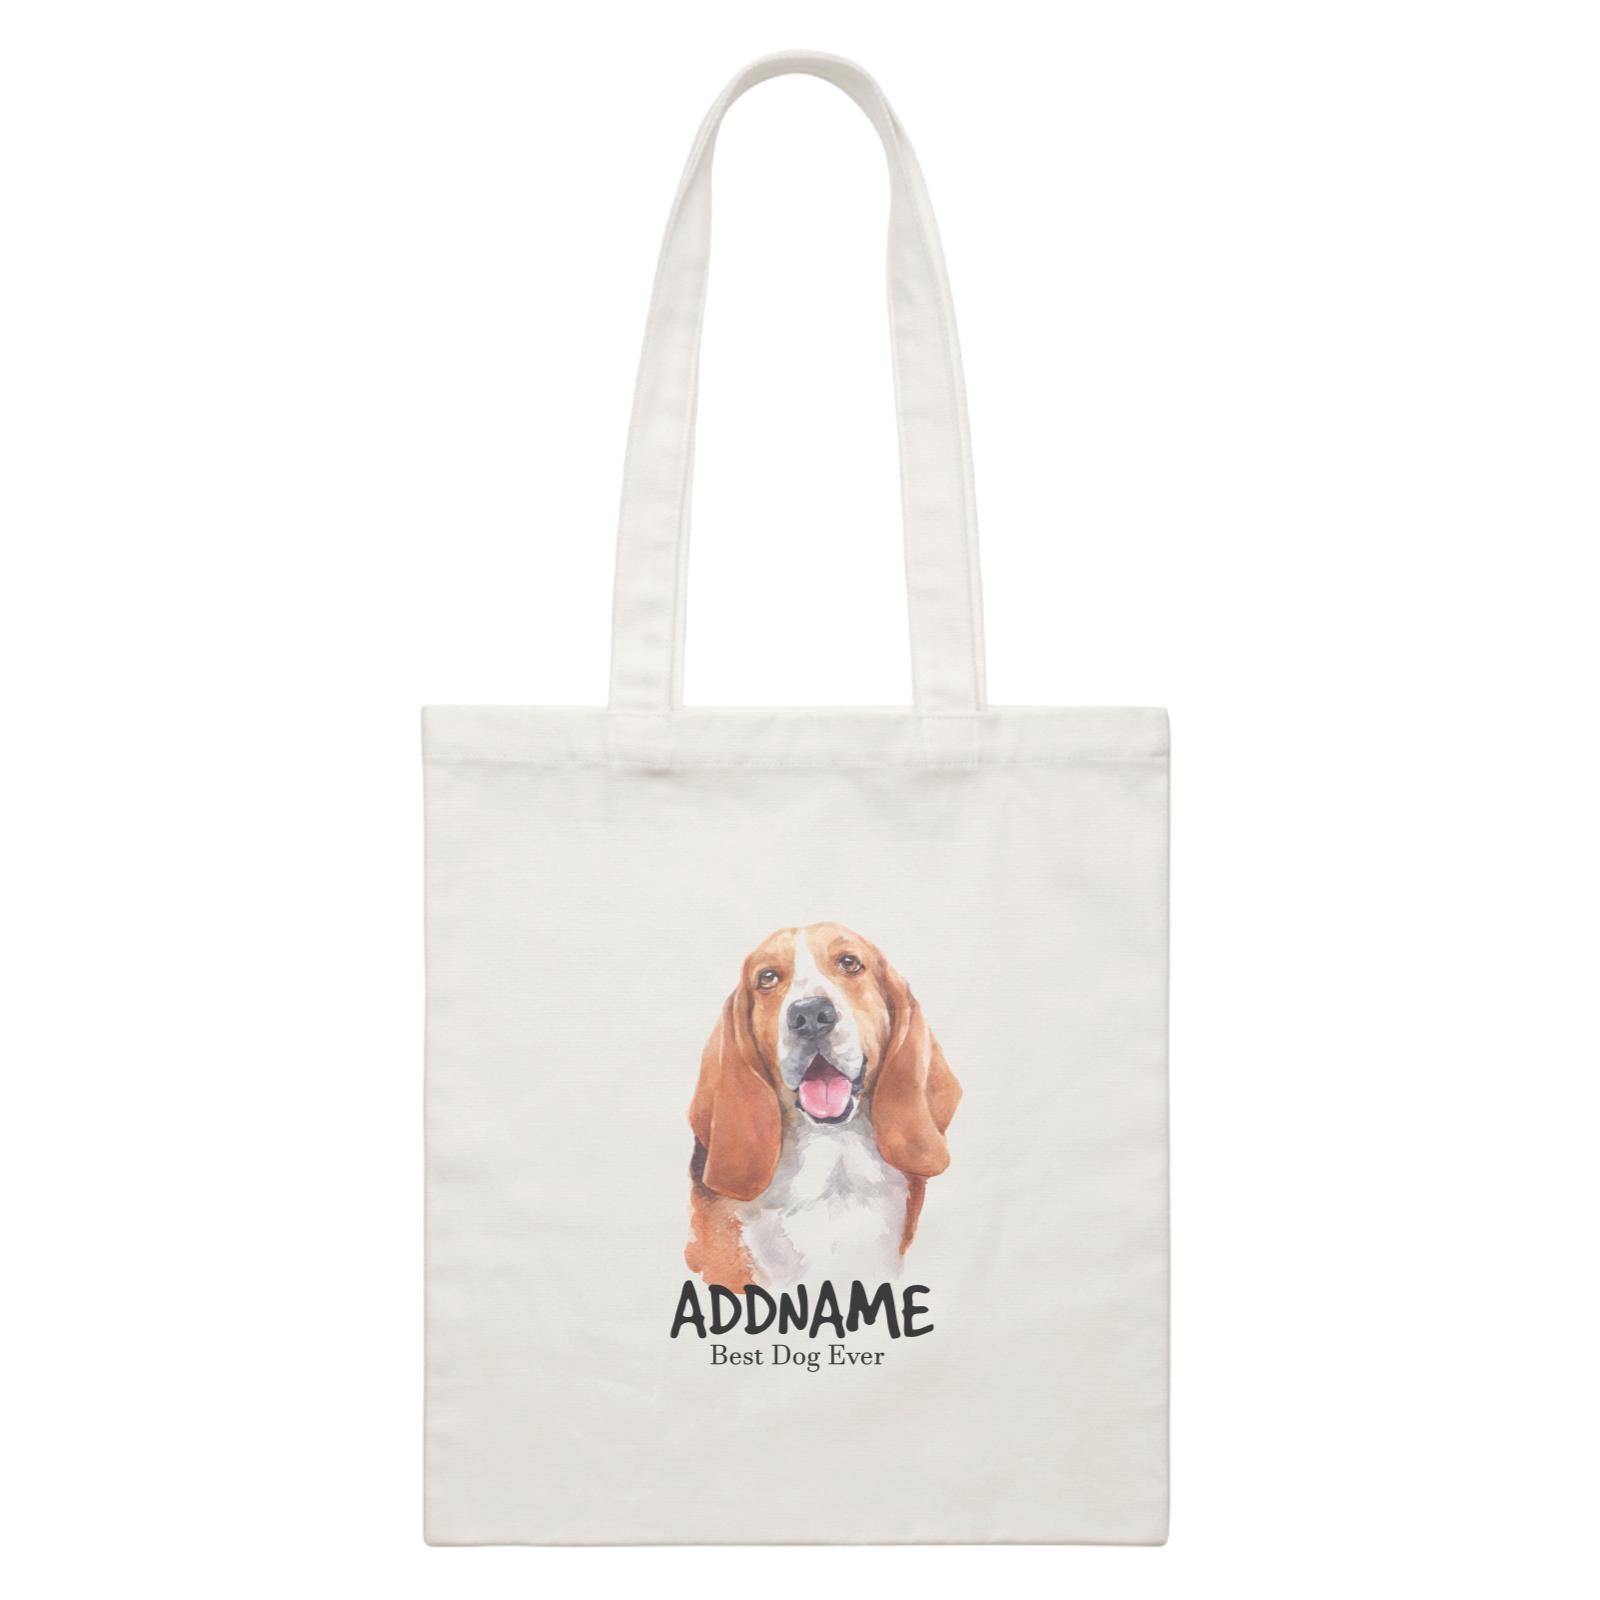 Watercolor Dog Basset Hound Happy Best Dog Ever Addname White Canvas Bag